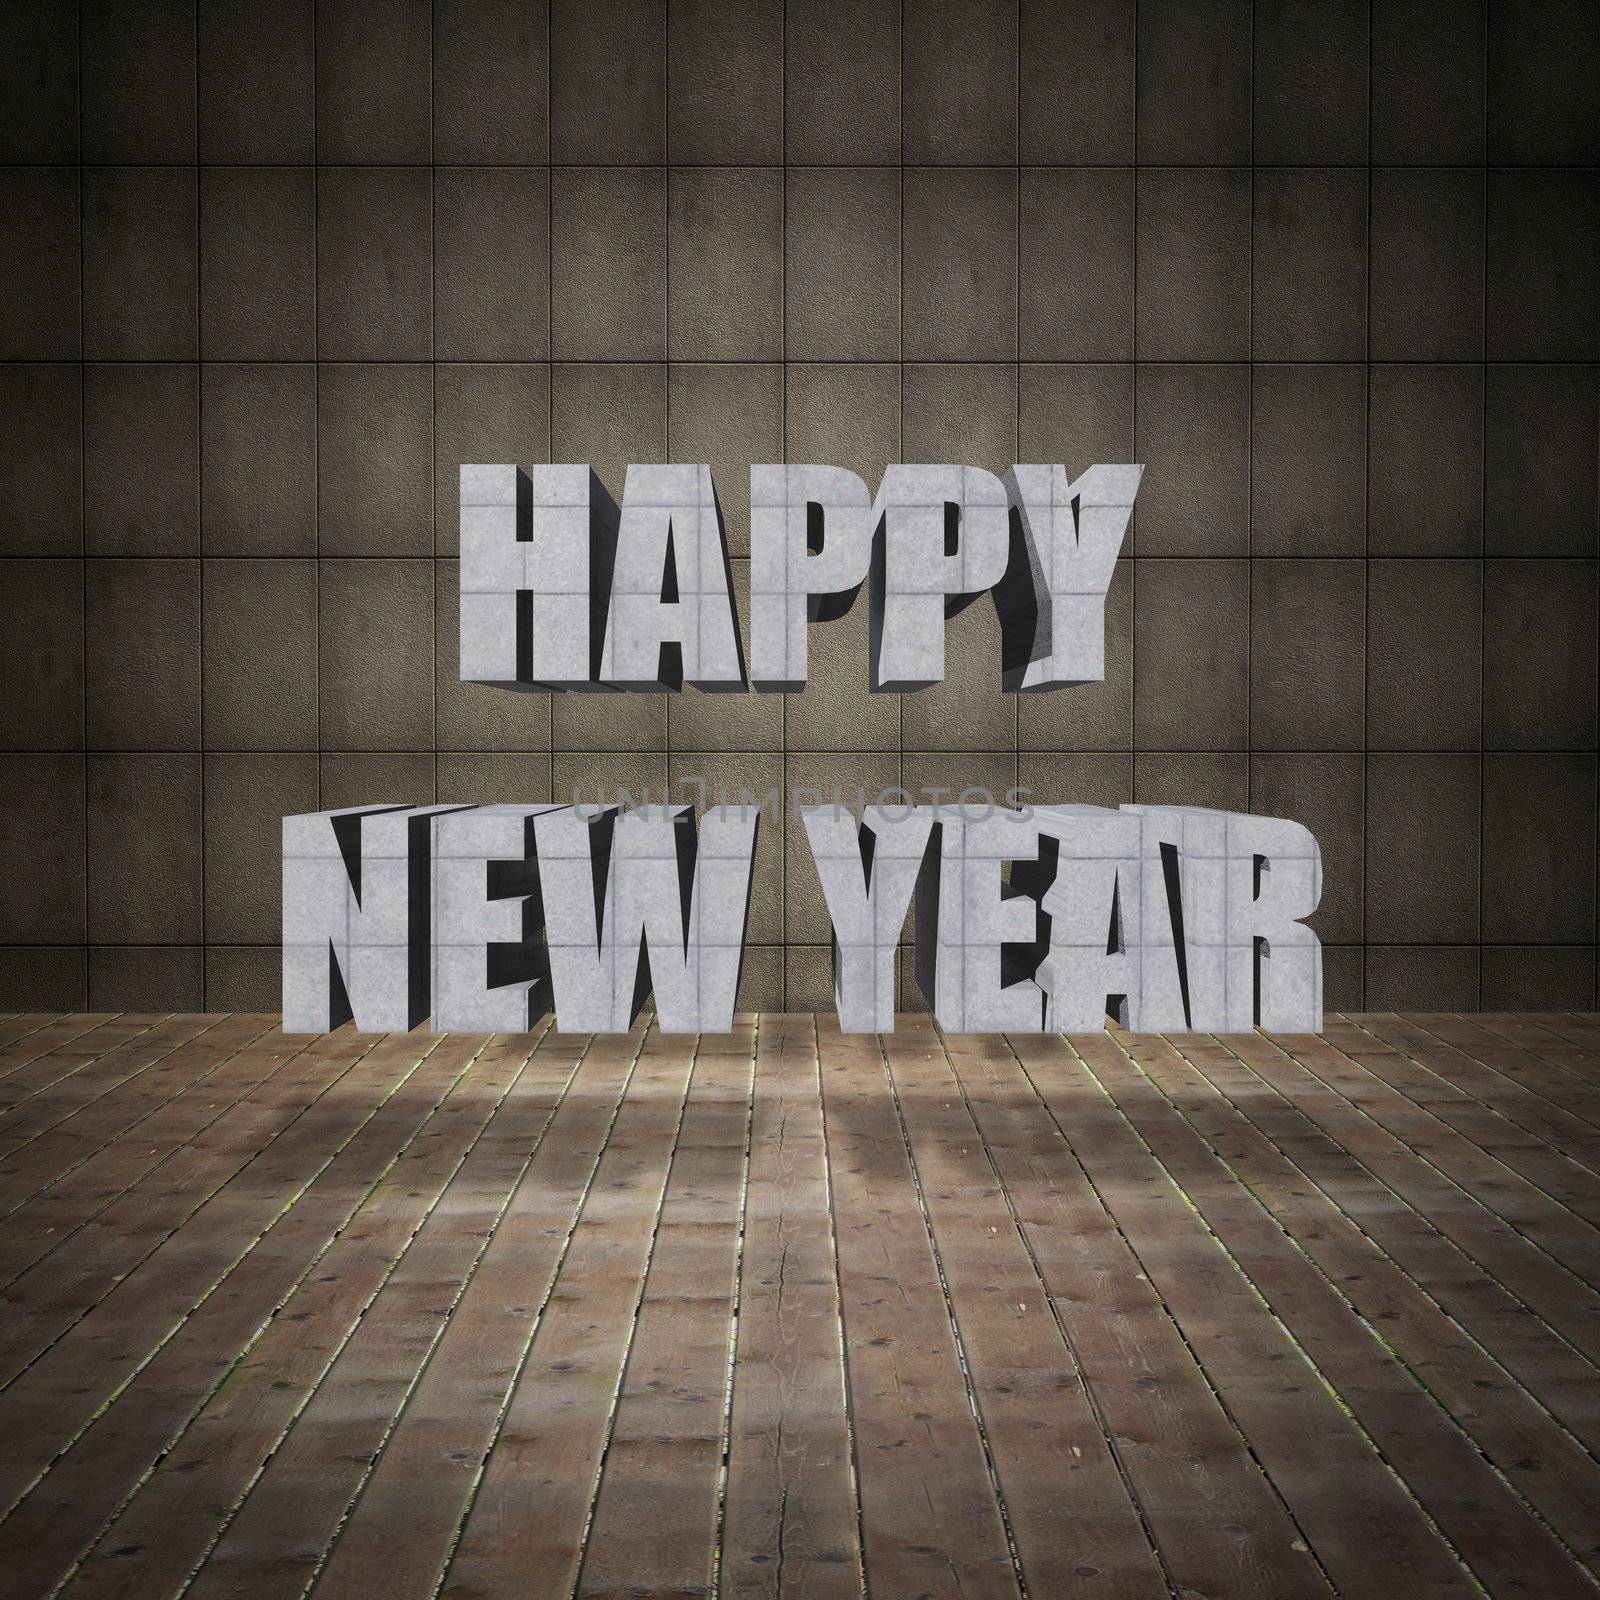 Happy New Year lettering with grunge wall and old wood floor by siraanamwong